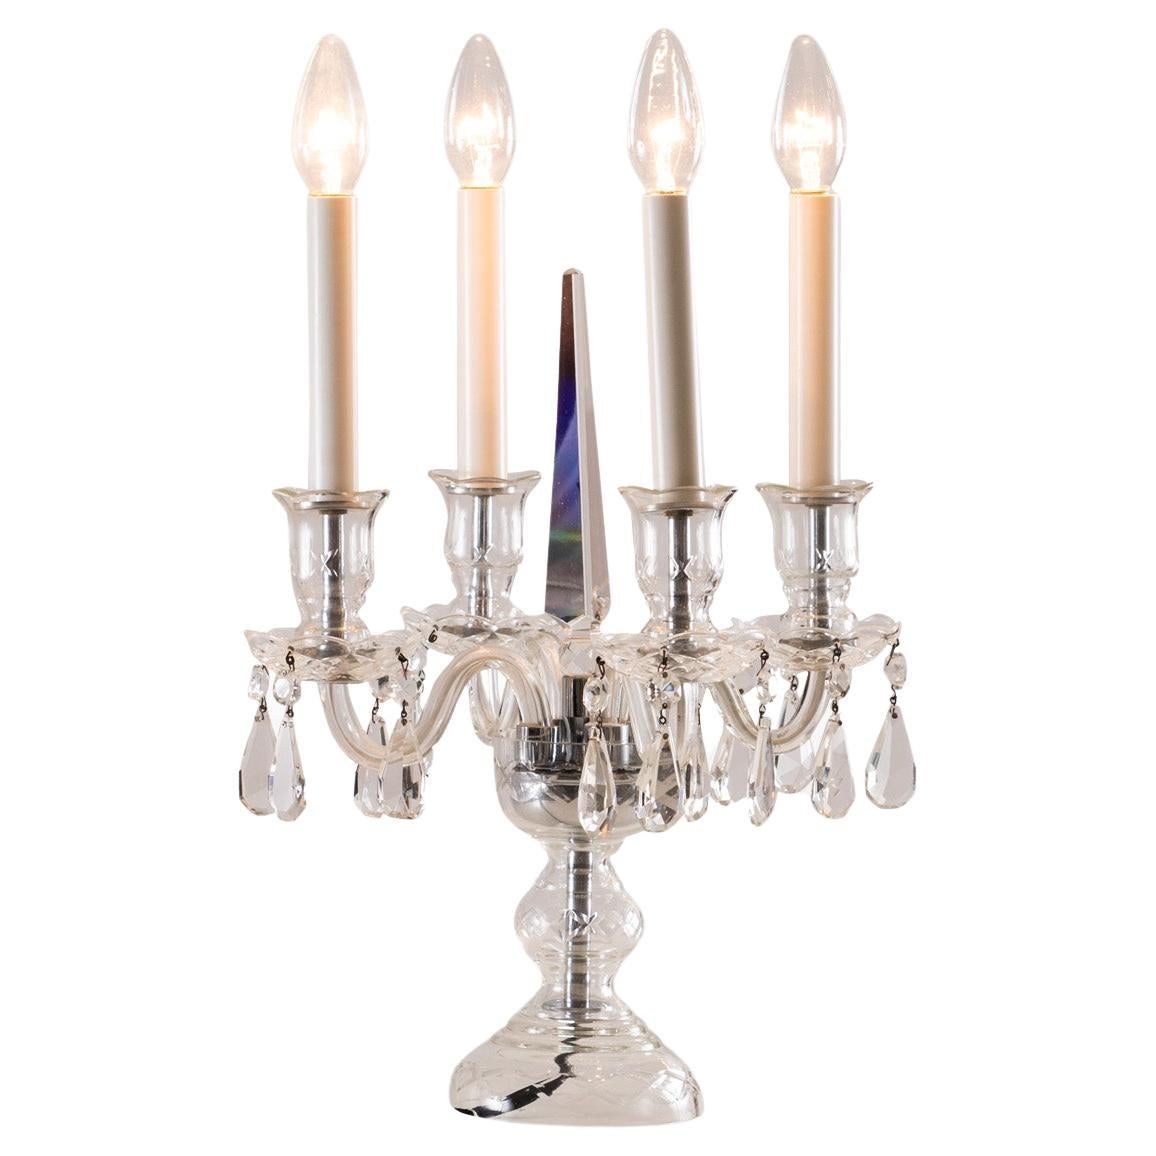 Original Early 20th Century Crystal Candelabra Table Lamp 